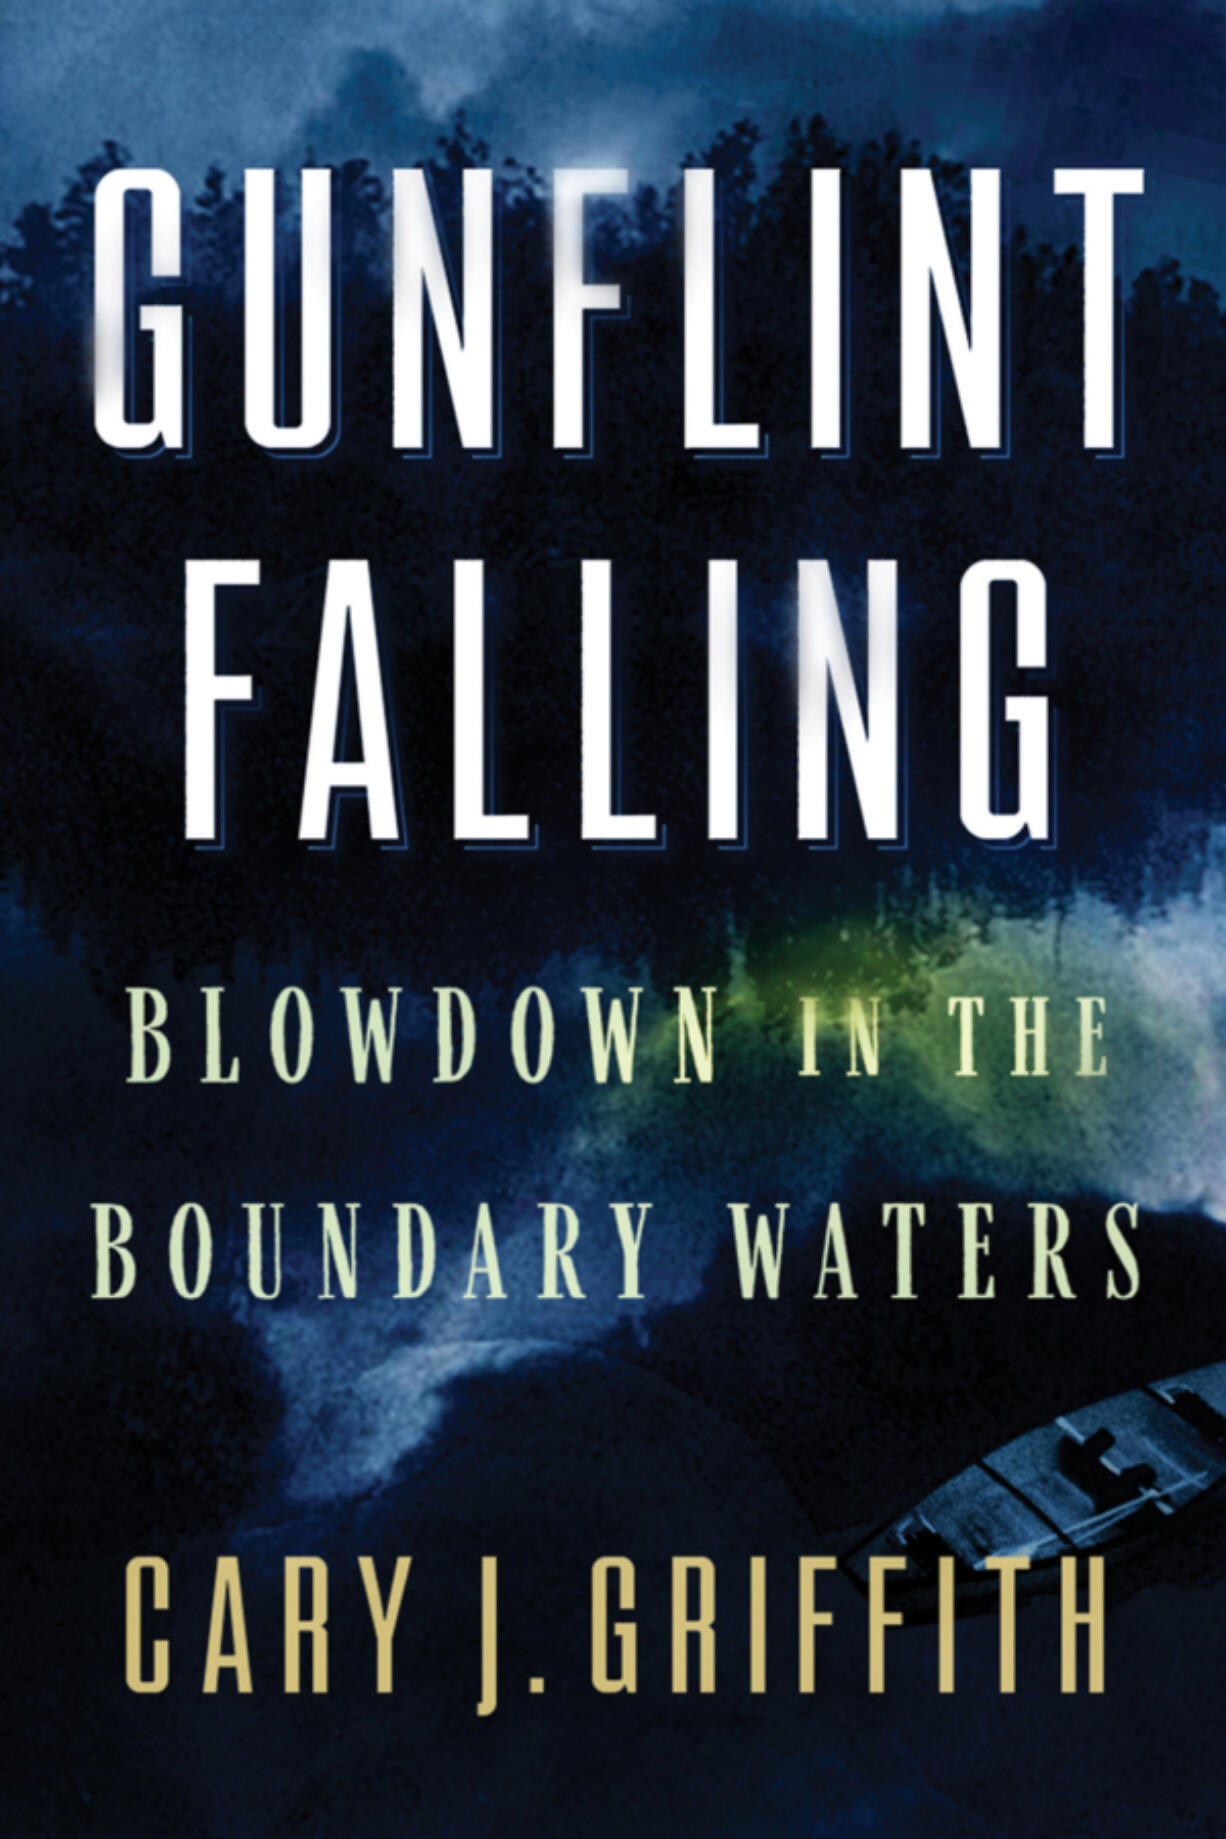 &ldquo;Gunflint Falling: Blowdown in the Boundary Waters,&rdquo; by Cary J. Griffith.